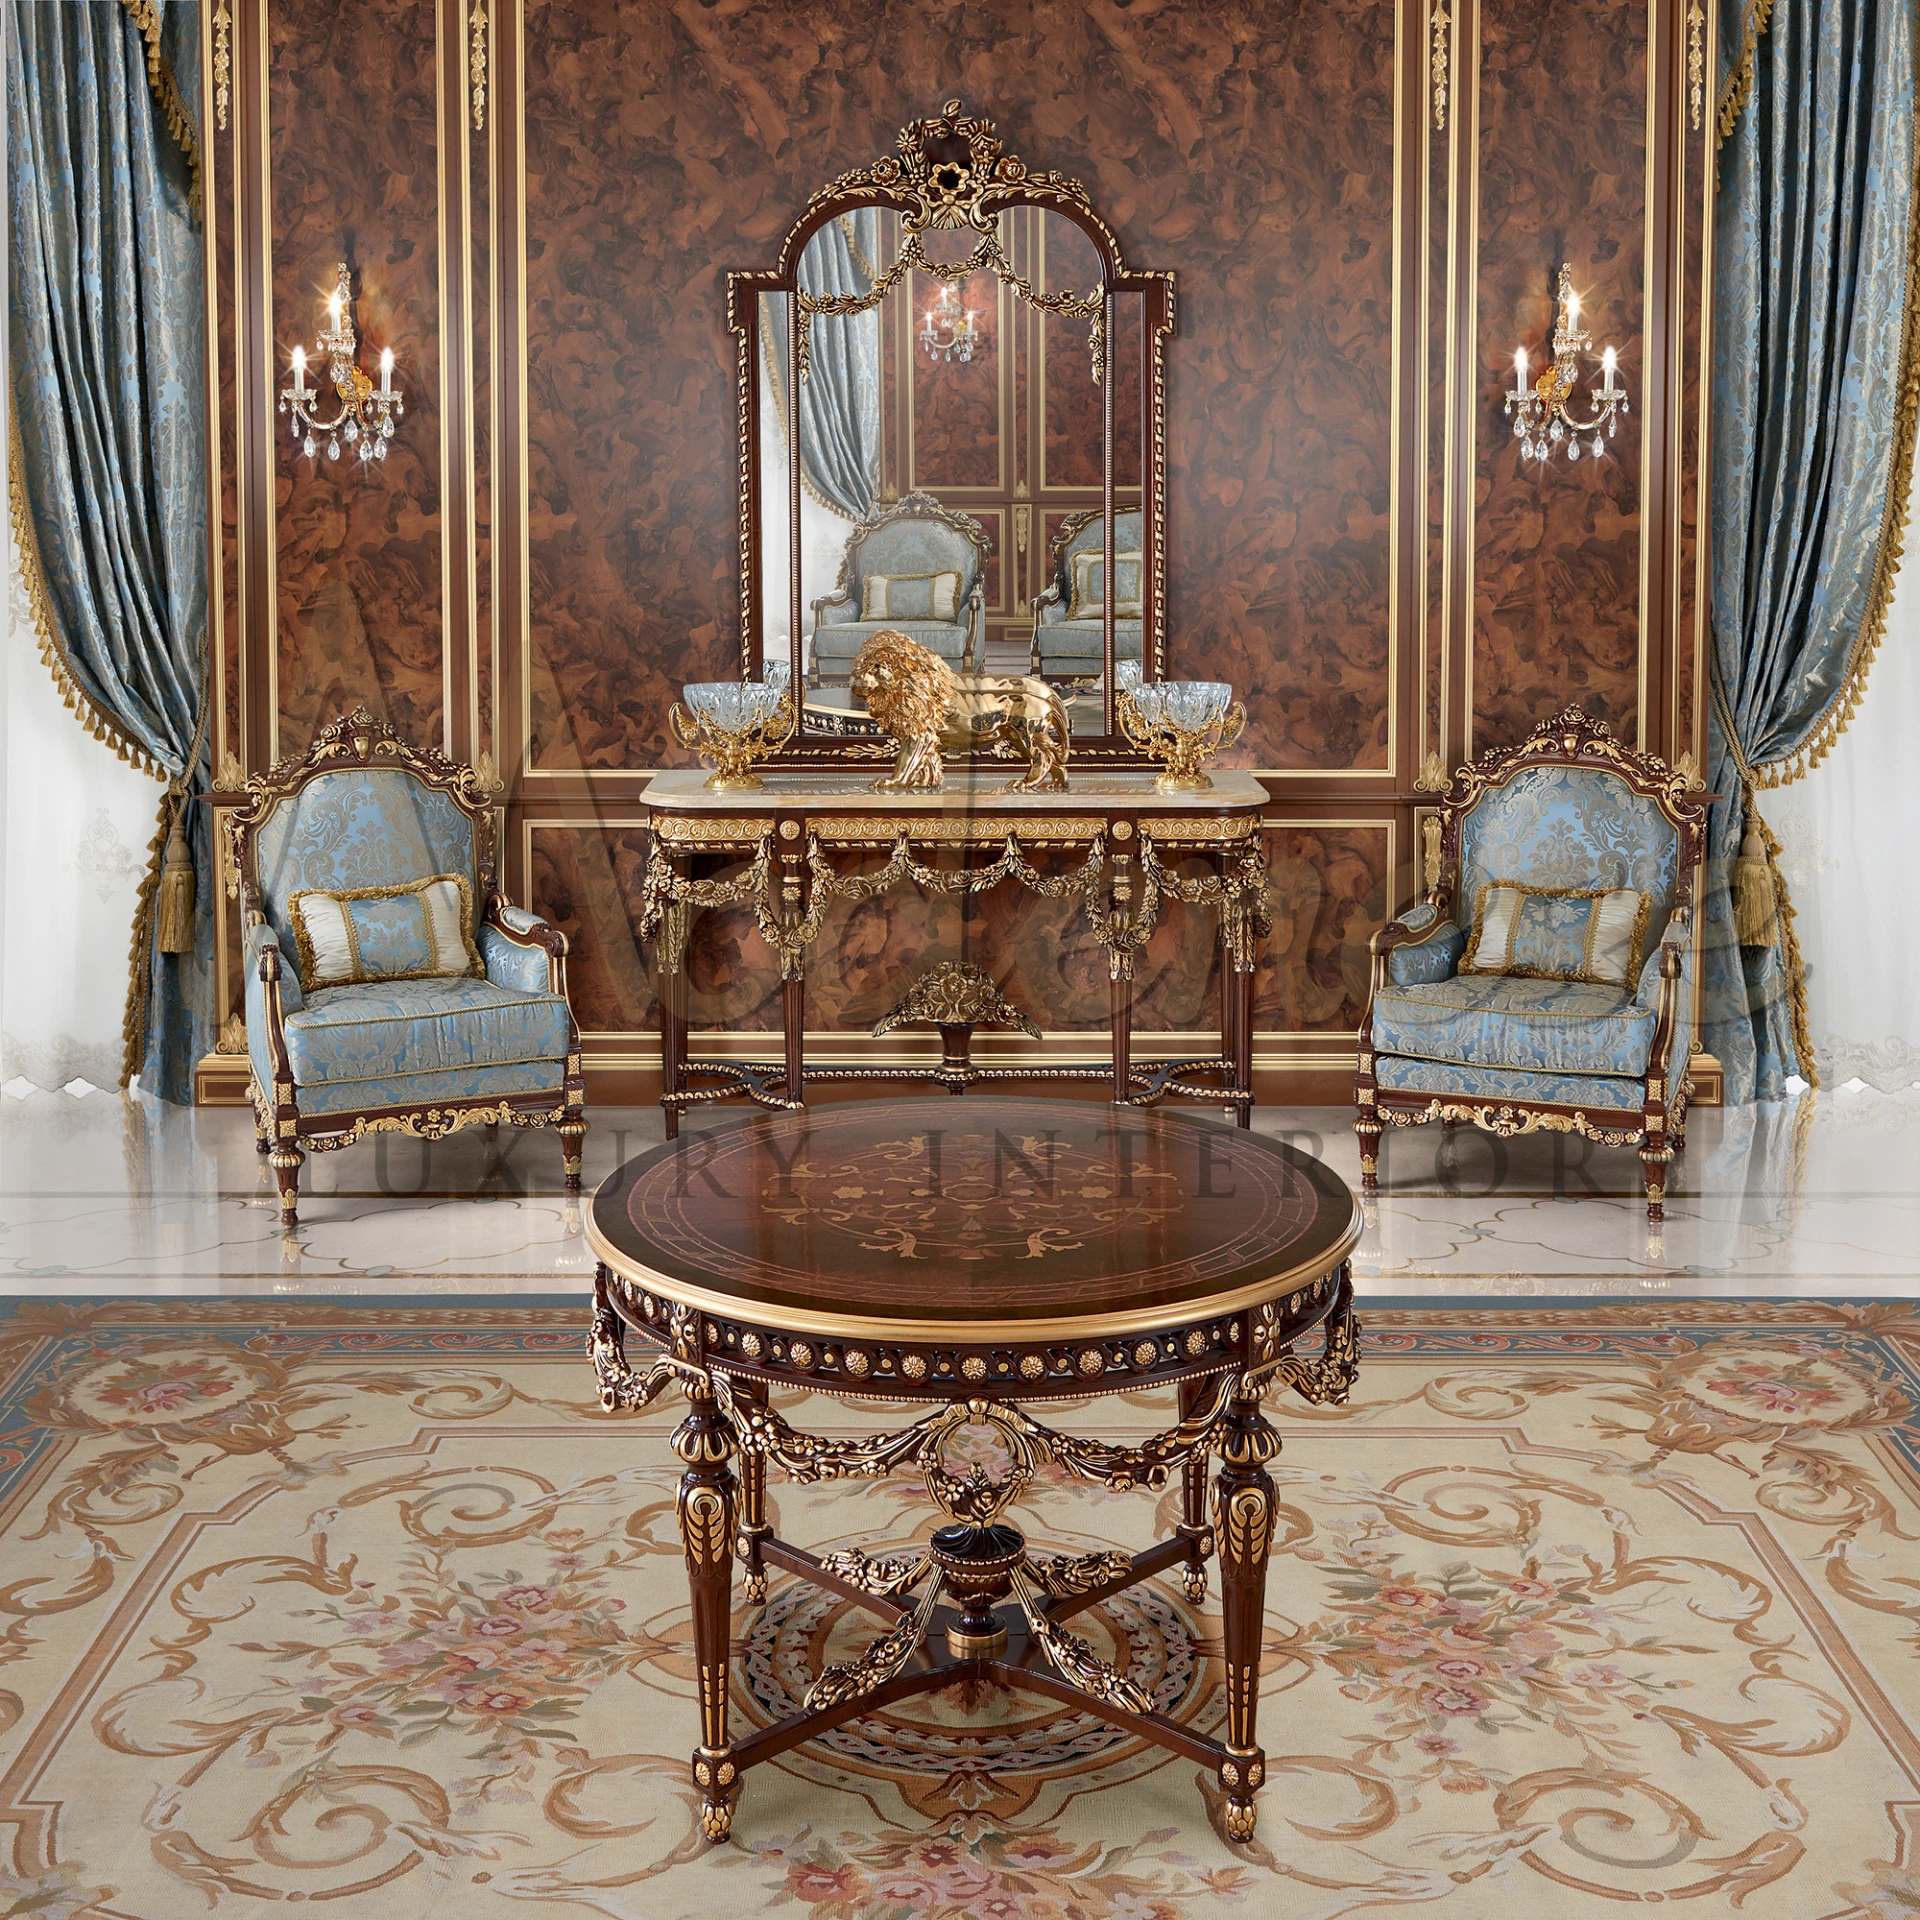 Hand-Carved Empire Console, a symbol of luxury and craftsmanship by Modenese Interiors